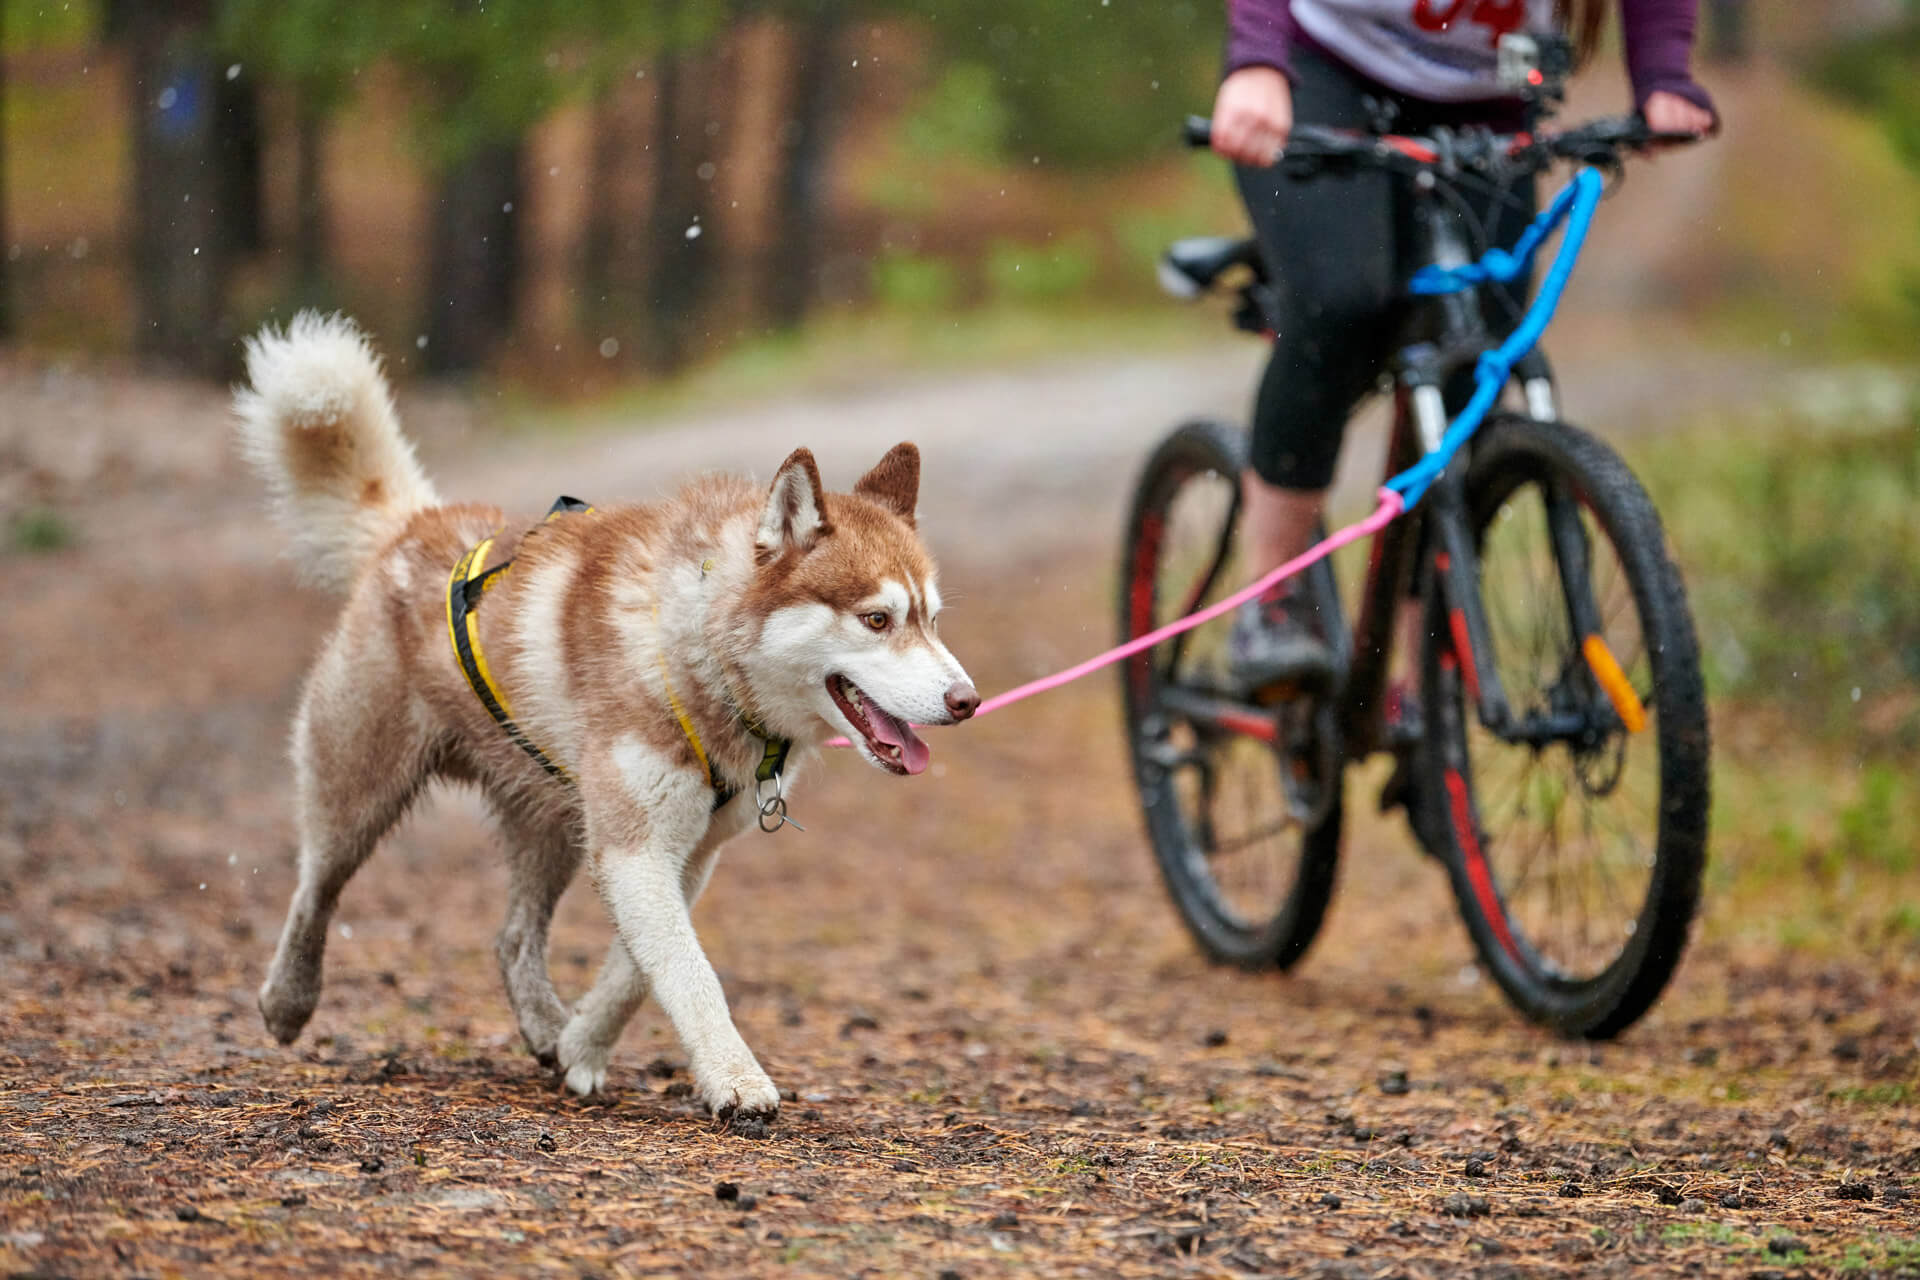 brown and white dog on a harness and leash running alongside a person on a bike outdoors